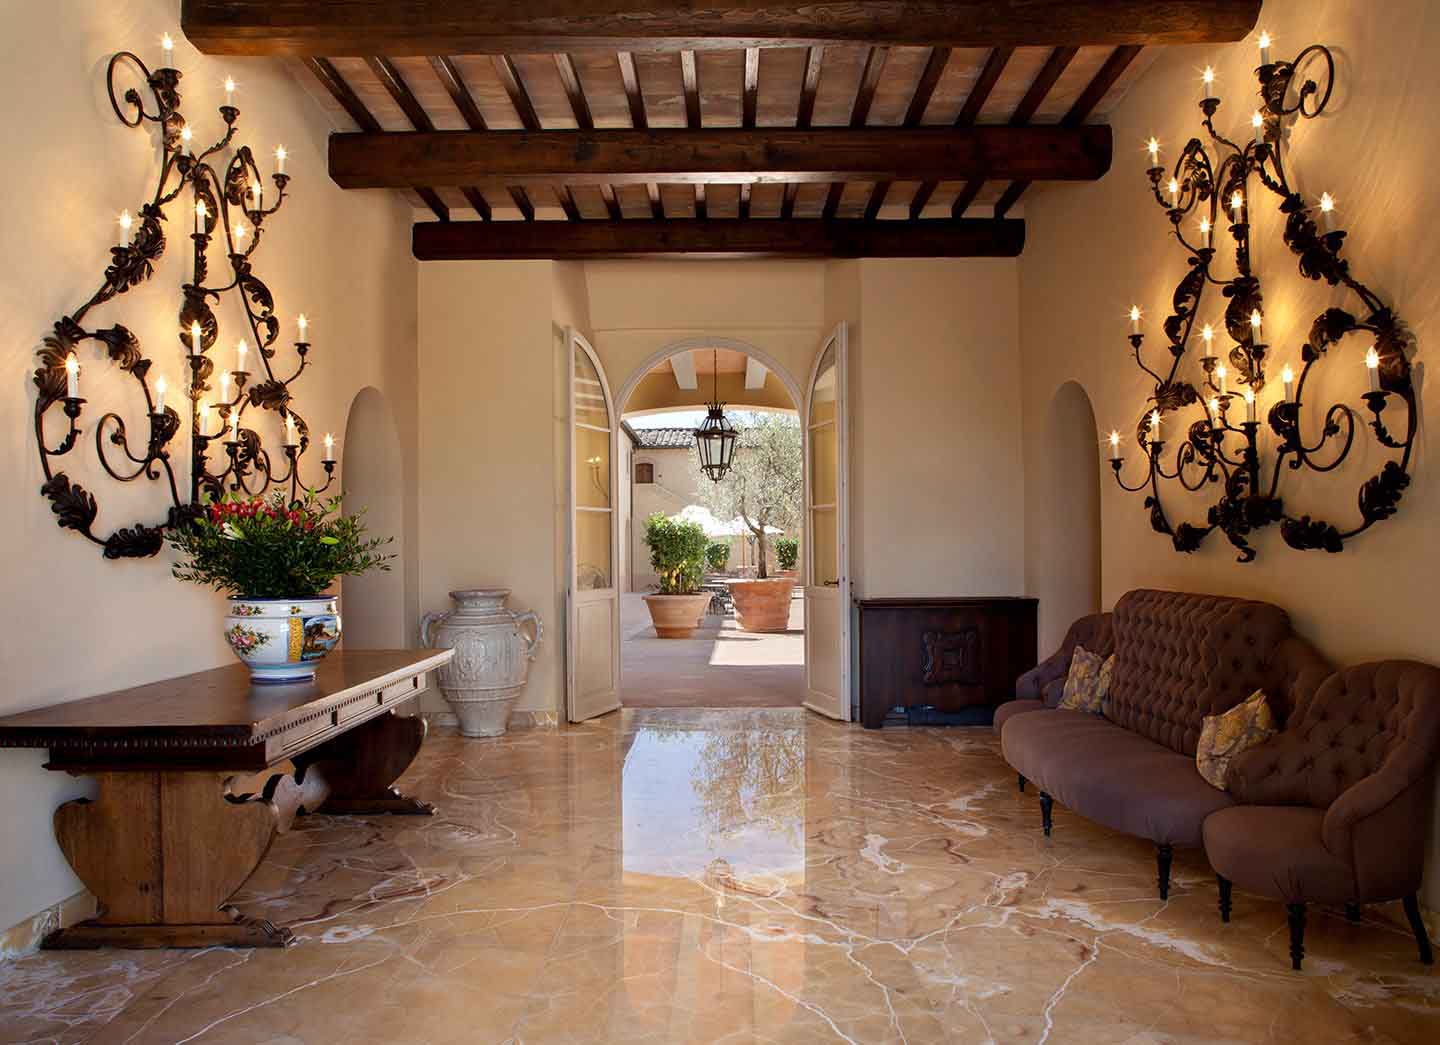 Entry Hall at castello di casole tuscany hotel designed by j banks design group